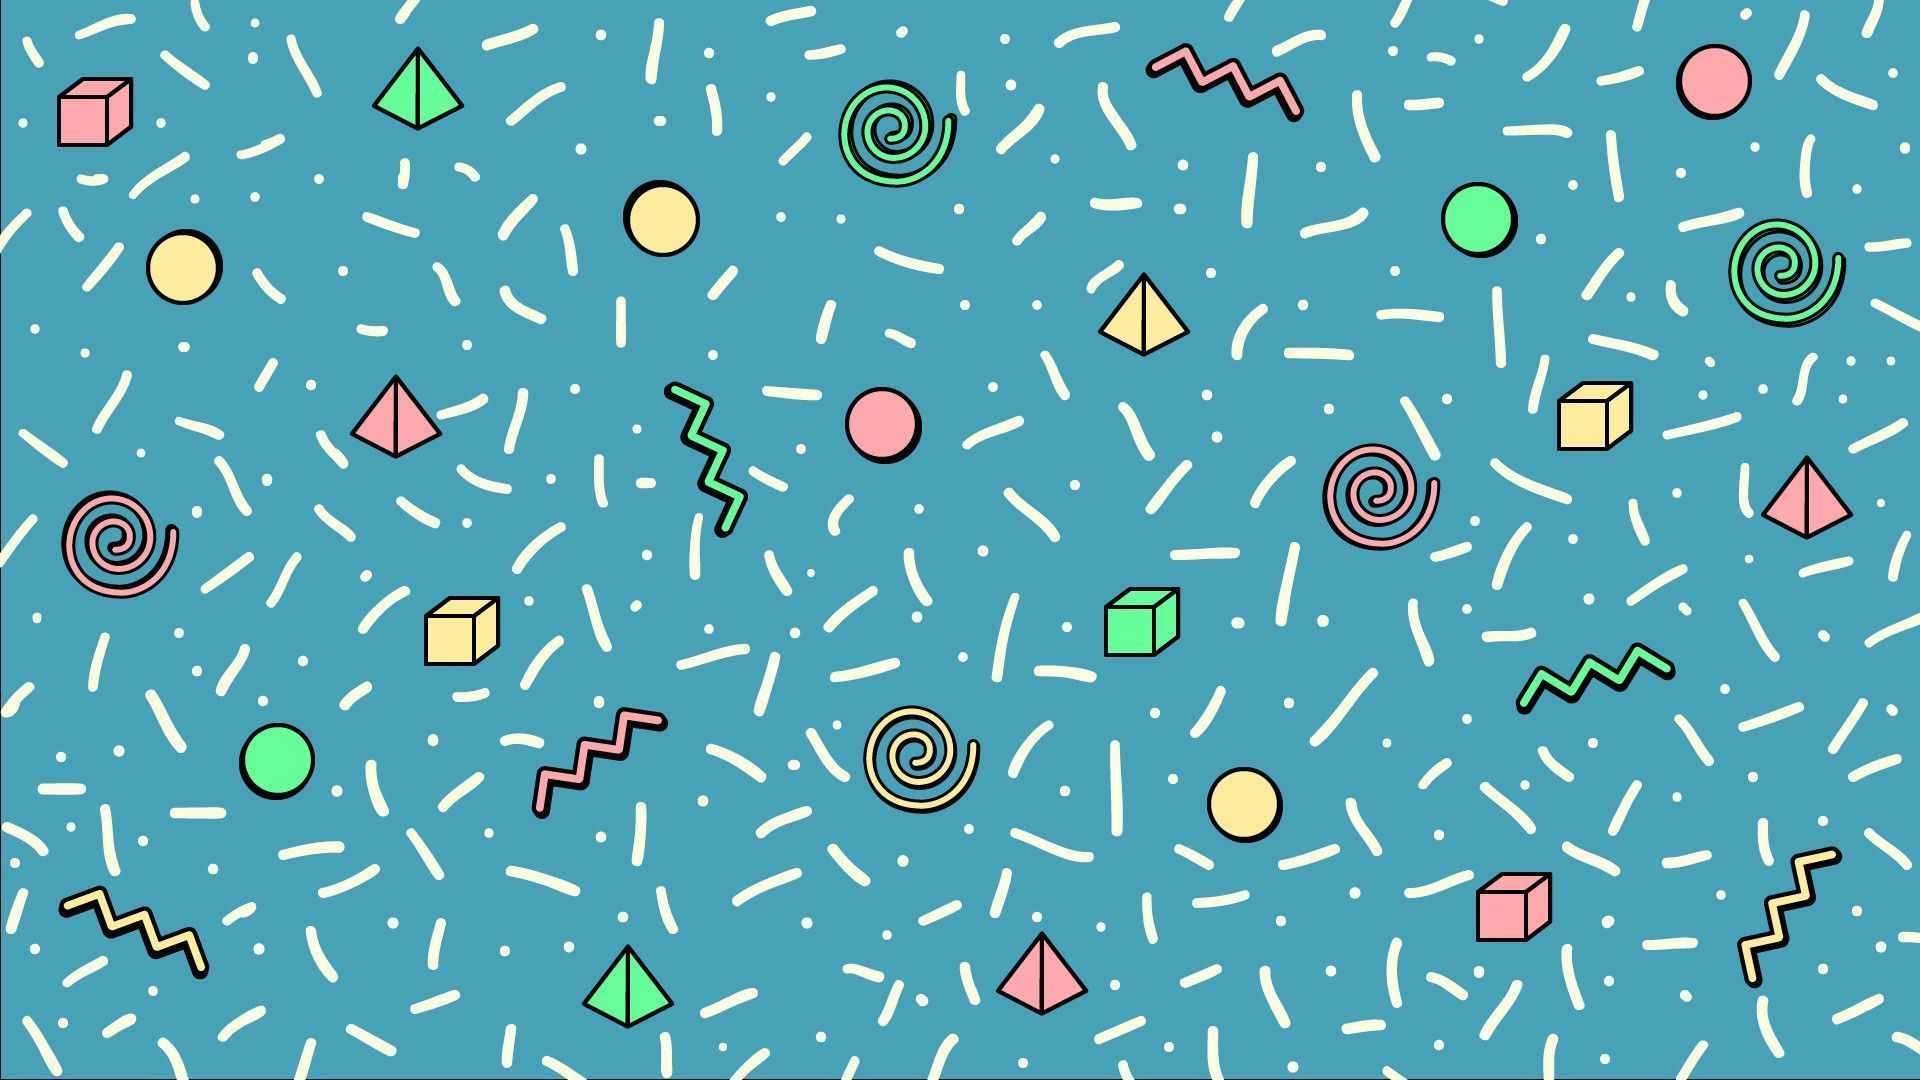 A pattern of colorful objects on blue background - Computer